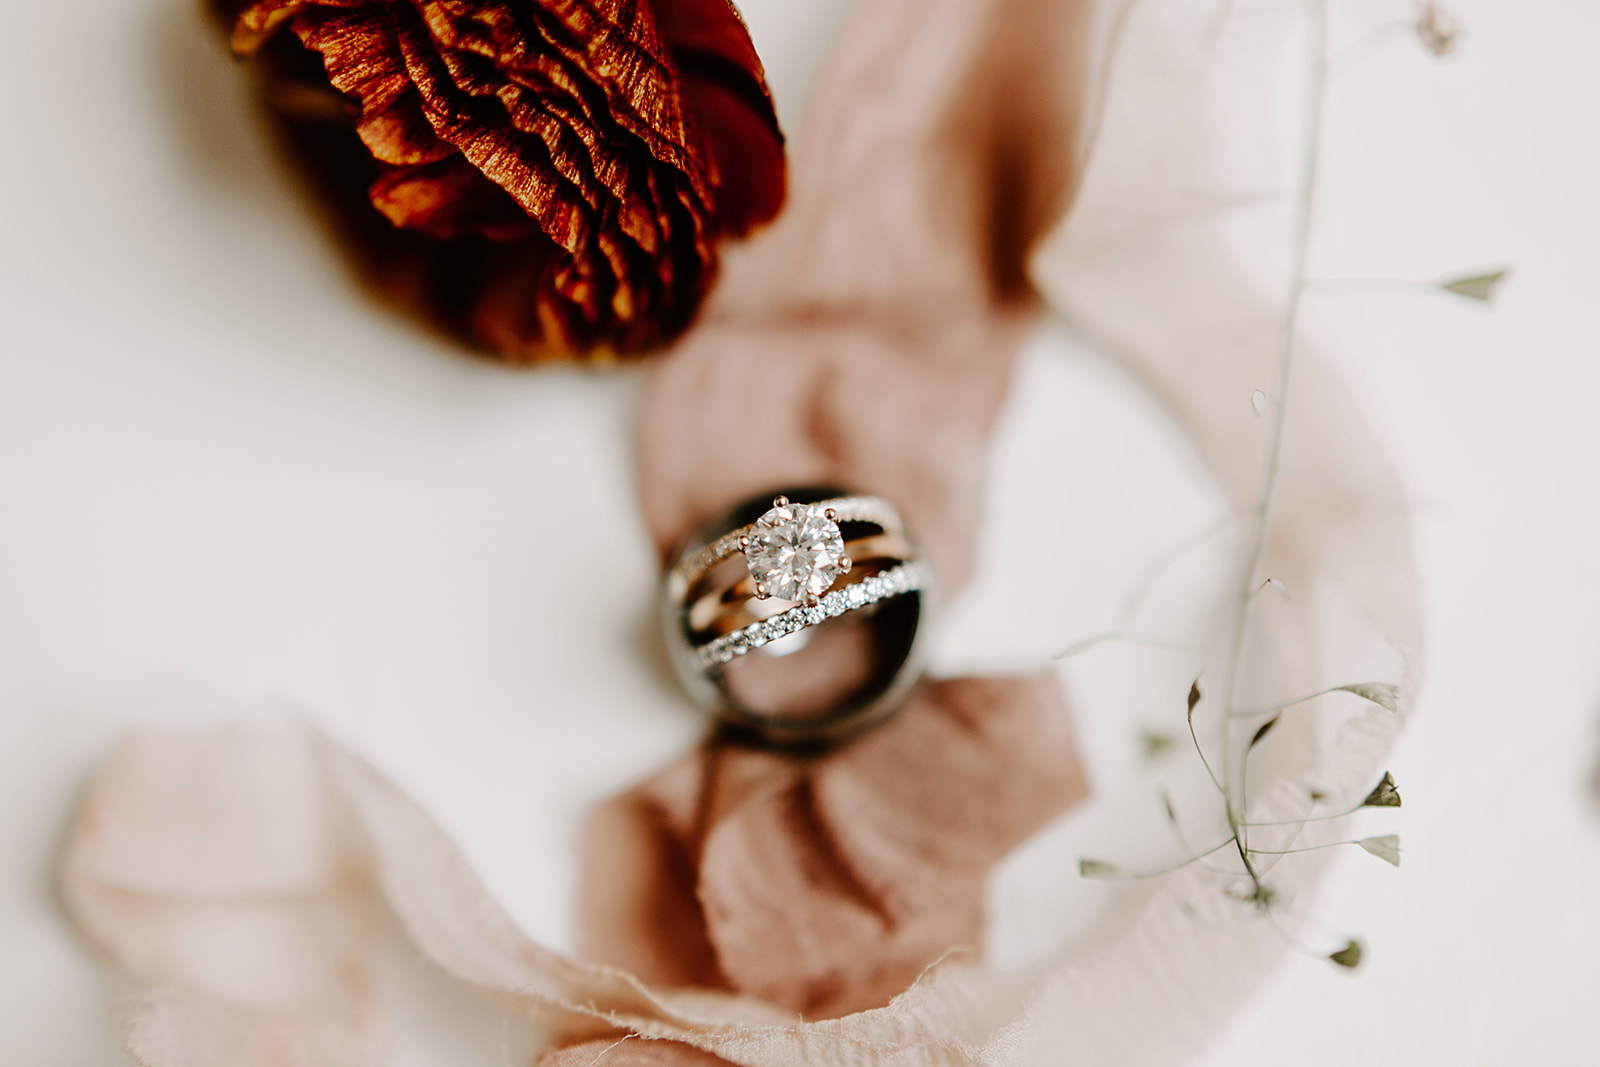 Wedding details inspiration including paper good and invites, wedding rings, wedding notes and jewellery | Photography by Emily Elyse Wehner, indiana based wedding photographer 